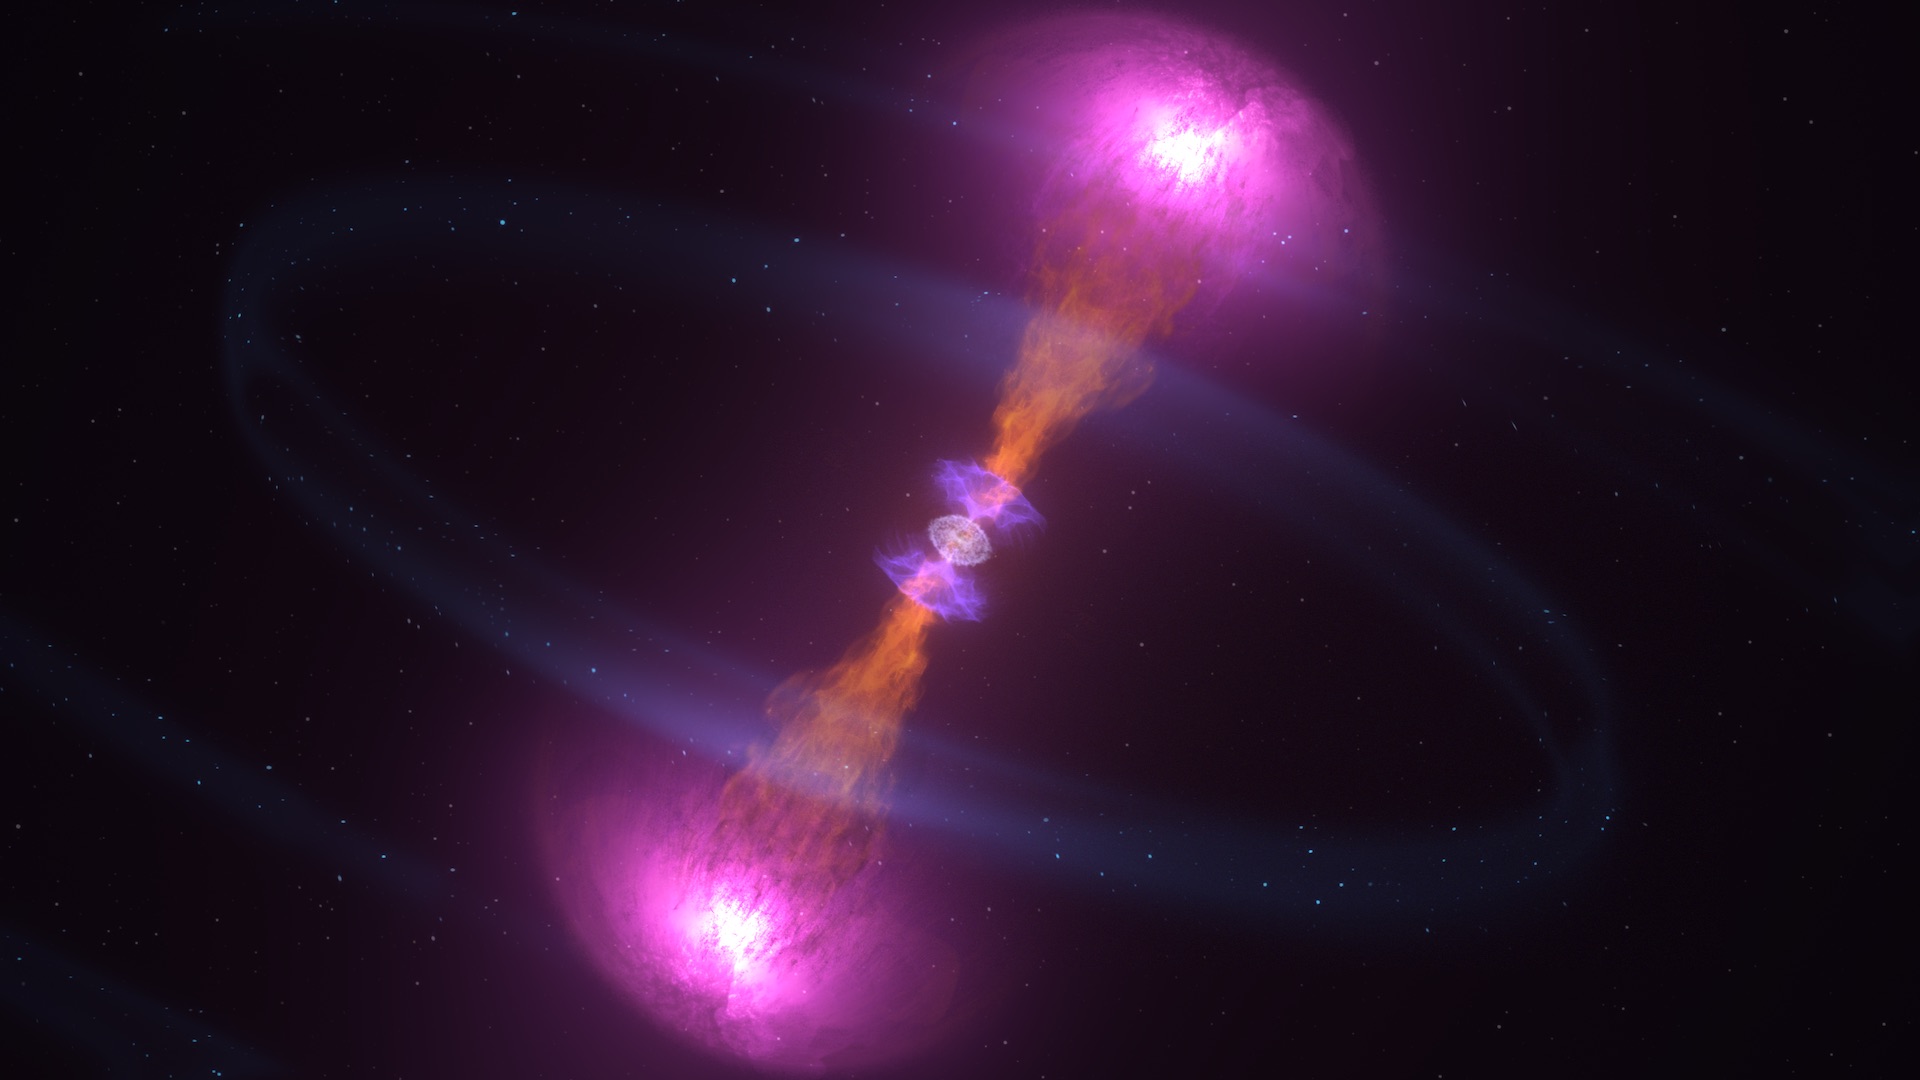 Preview Image for Doomed Neutron Stars Create Blast of Light and Gravitational Waves